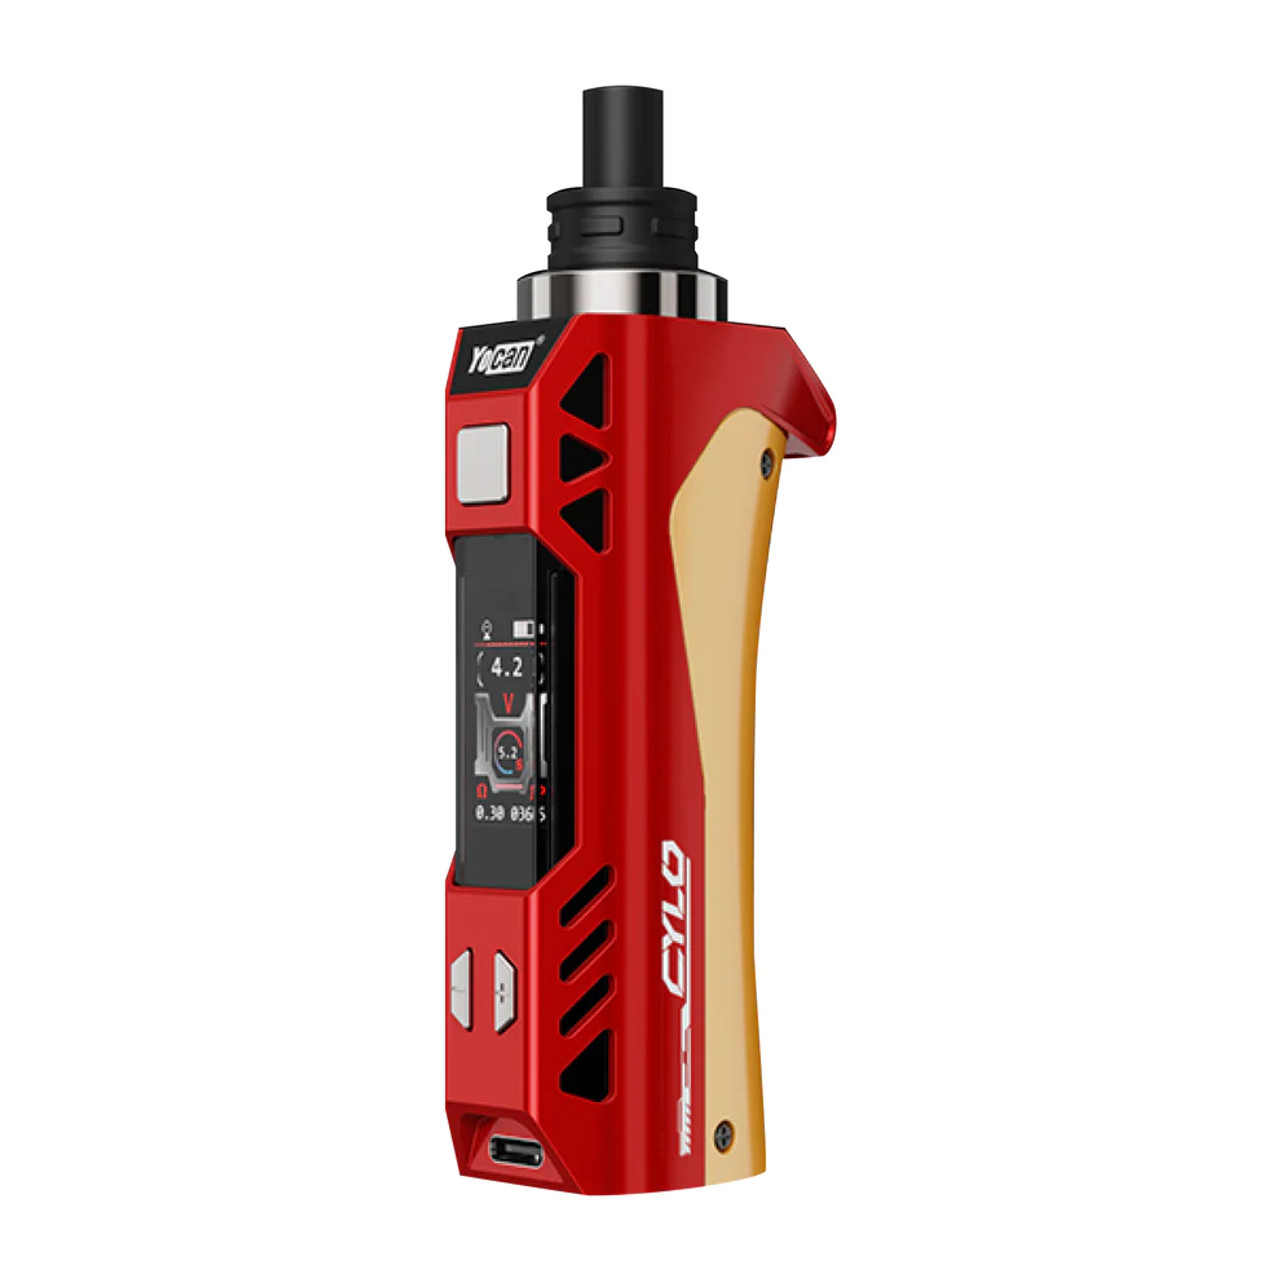 Yocan CYLO | 1300mah Variable Voltage Battery | Gold